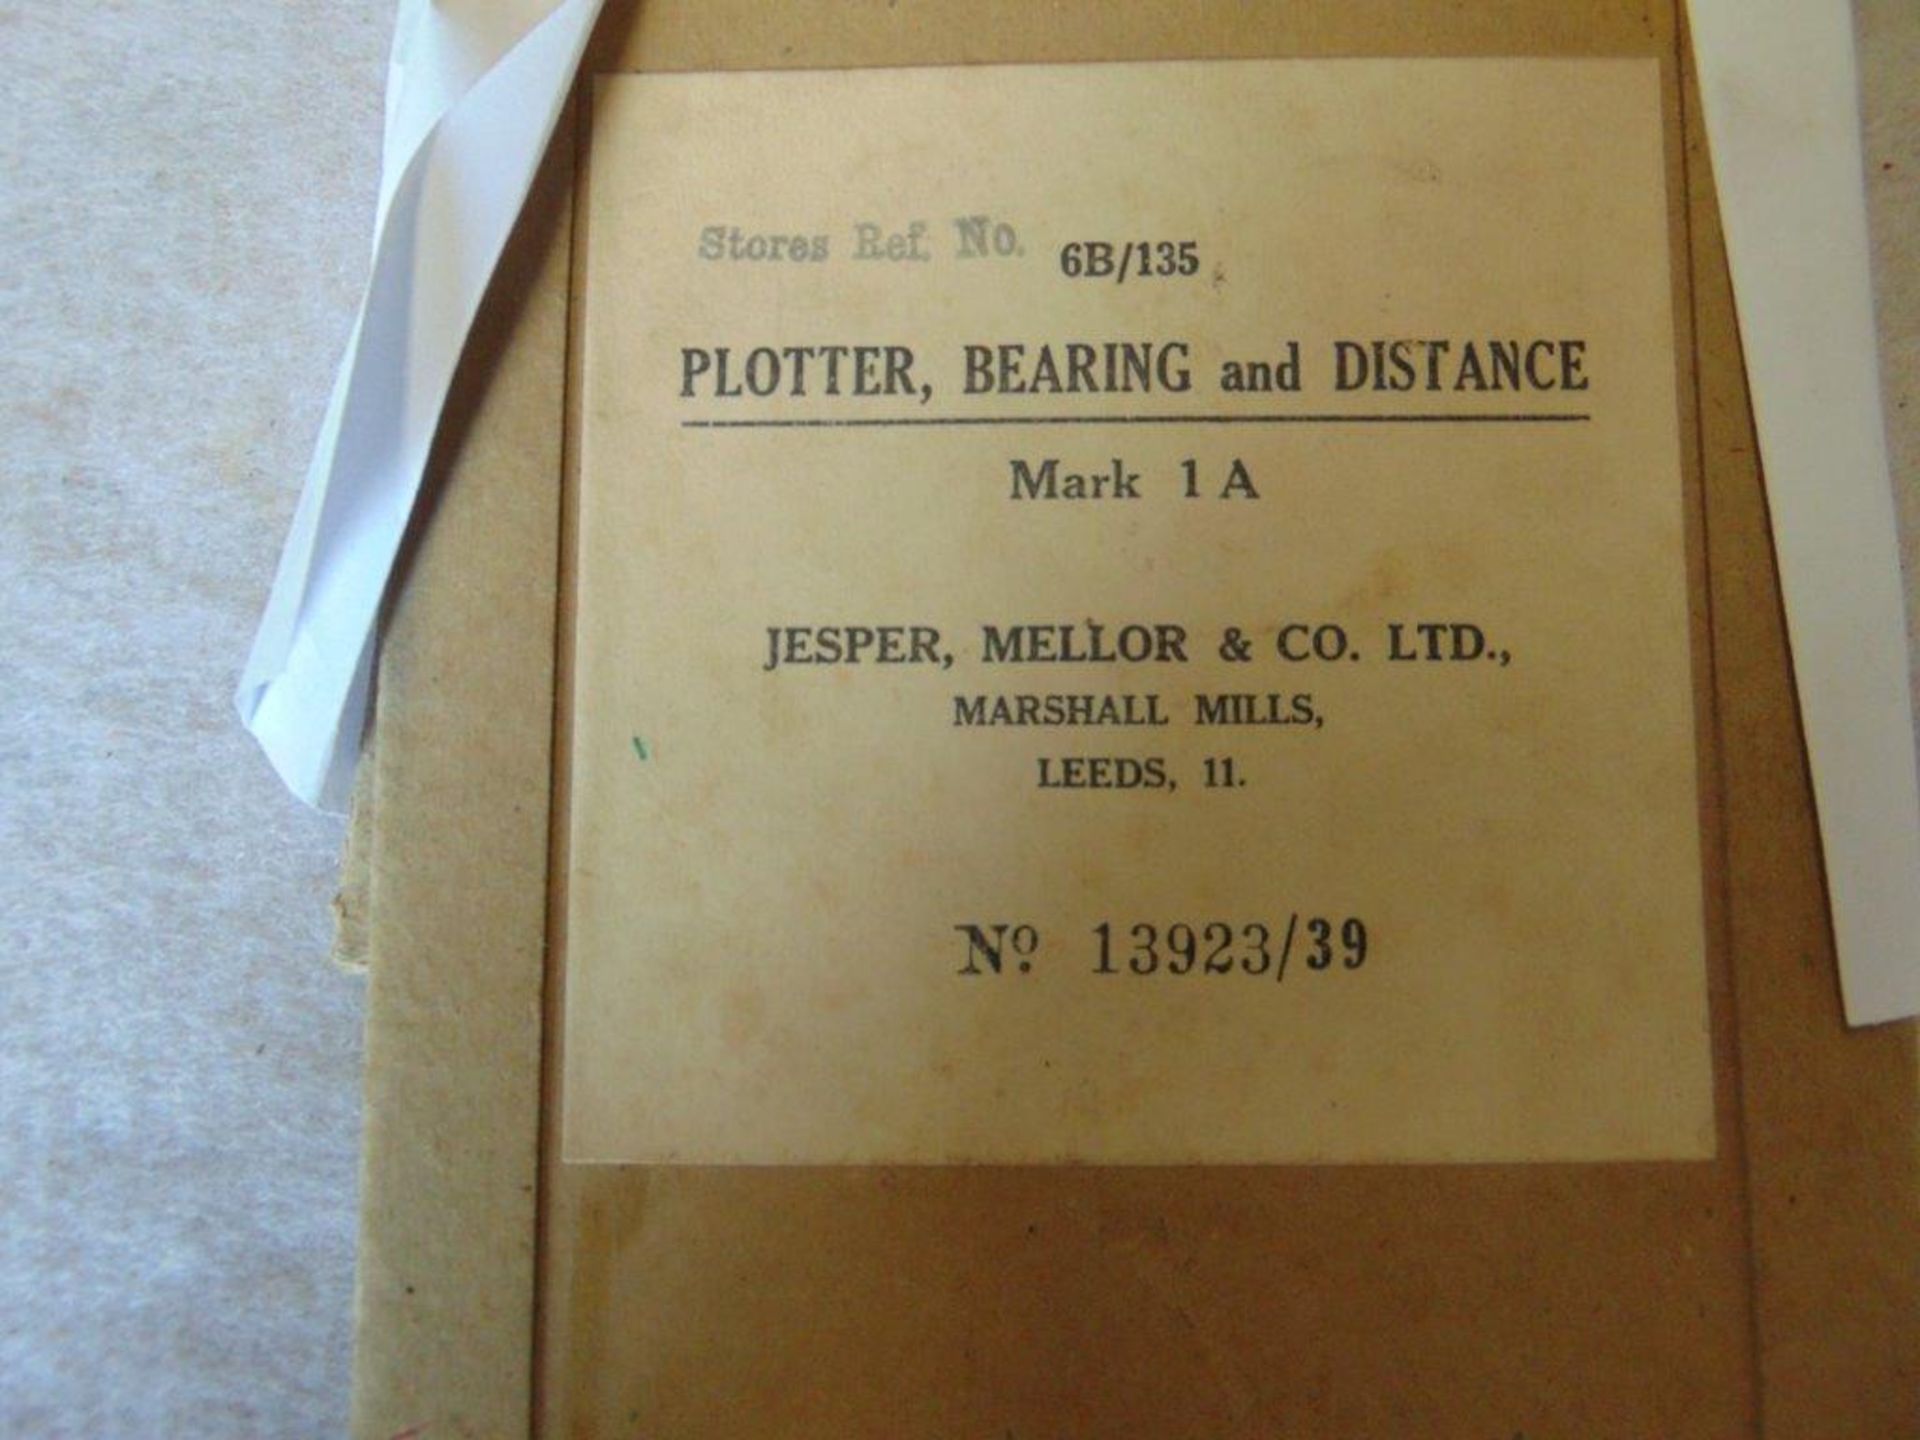 WW2 RAF Protractor and Bearing/Distance Plotter Marked 650 Sqdn - Image 4 of 4